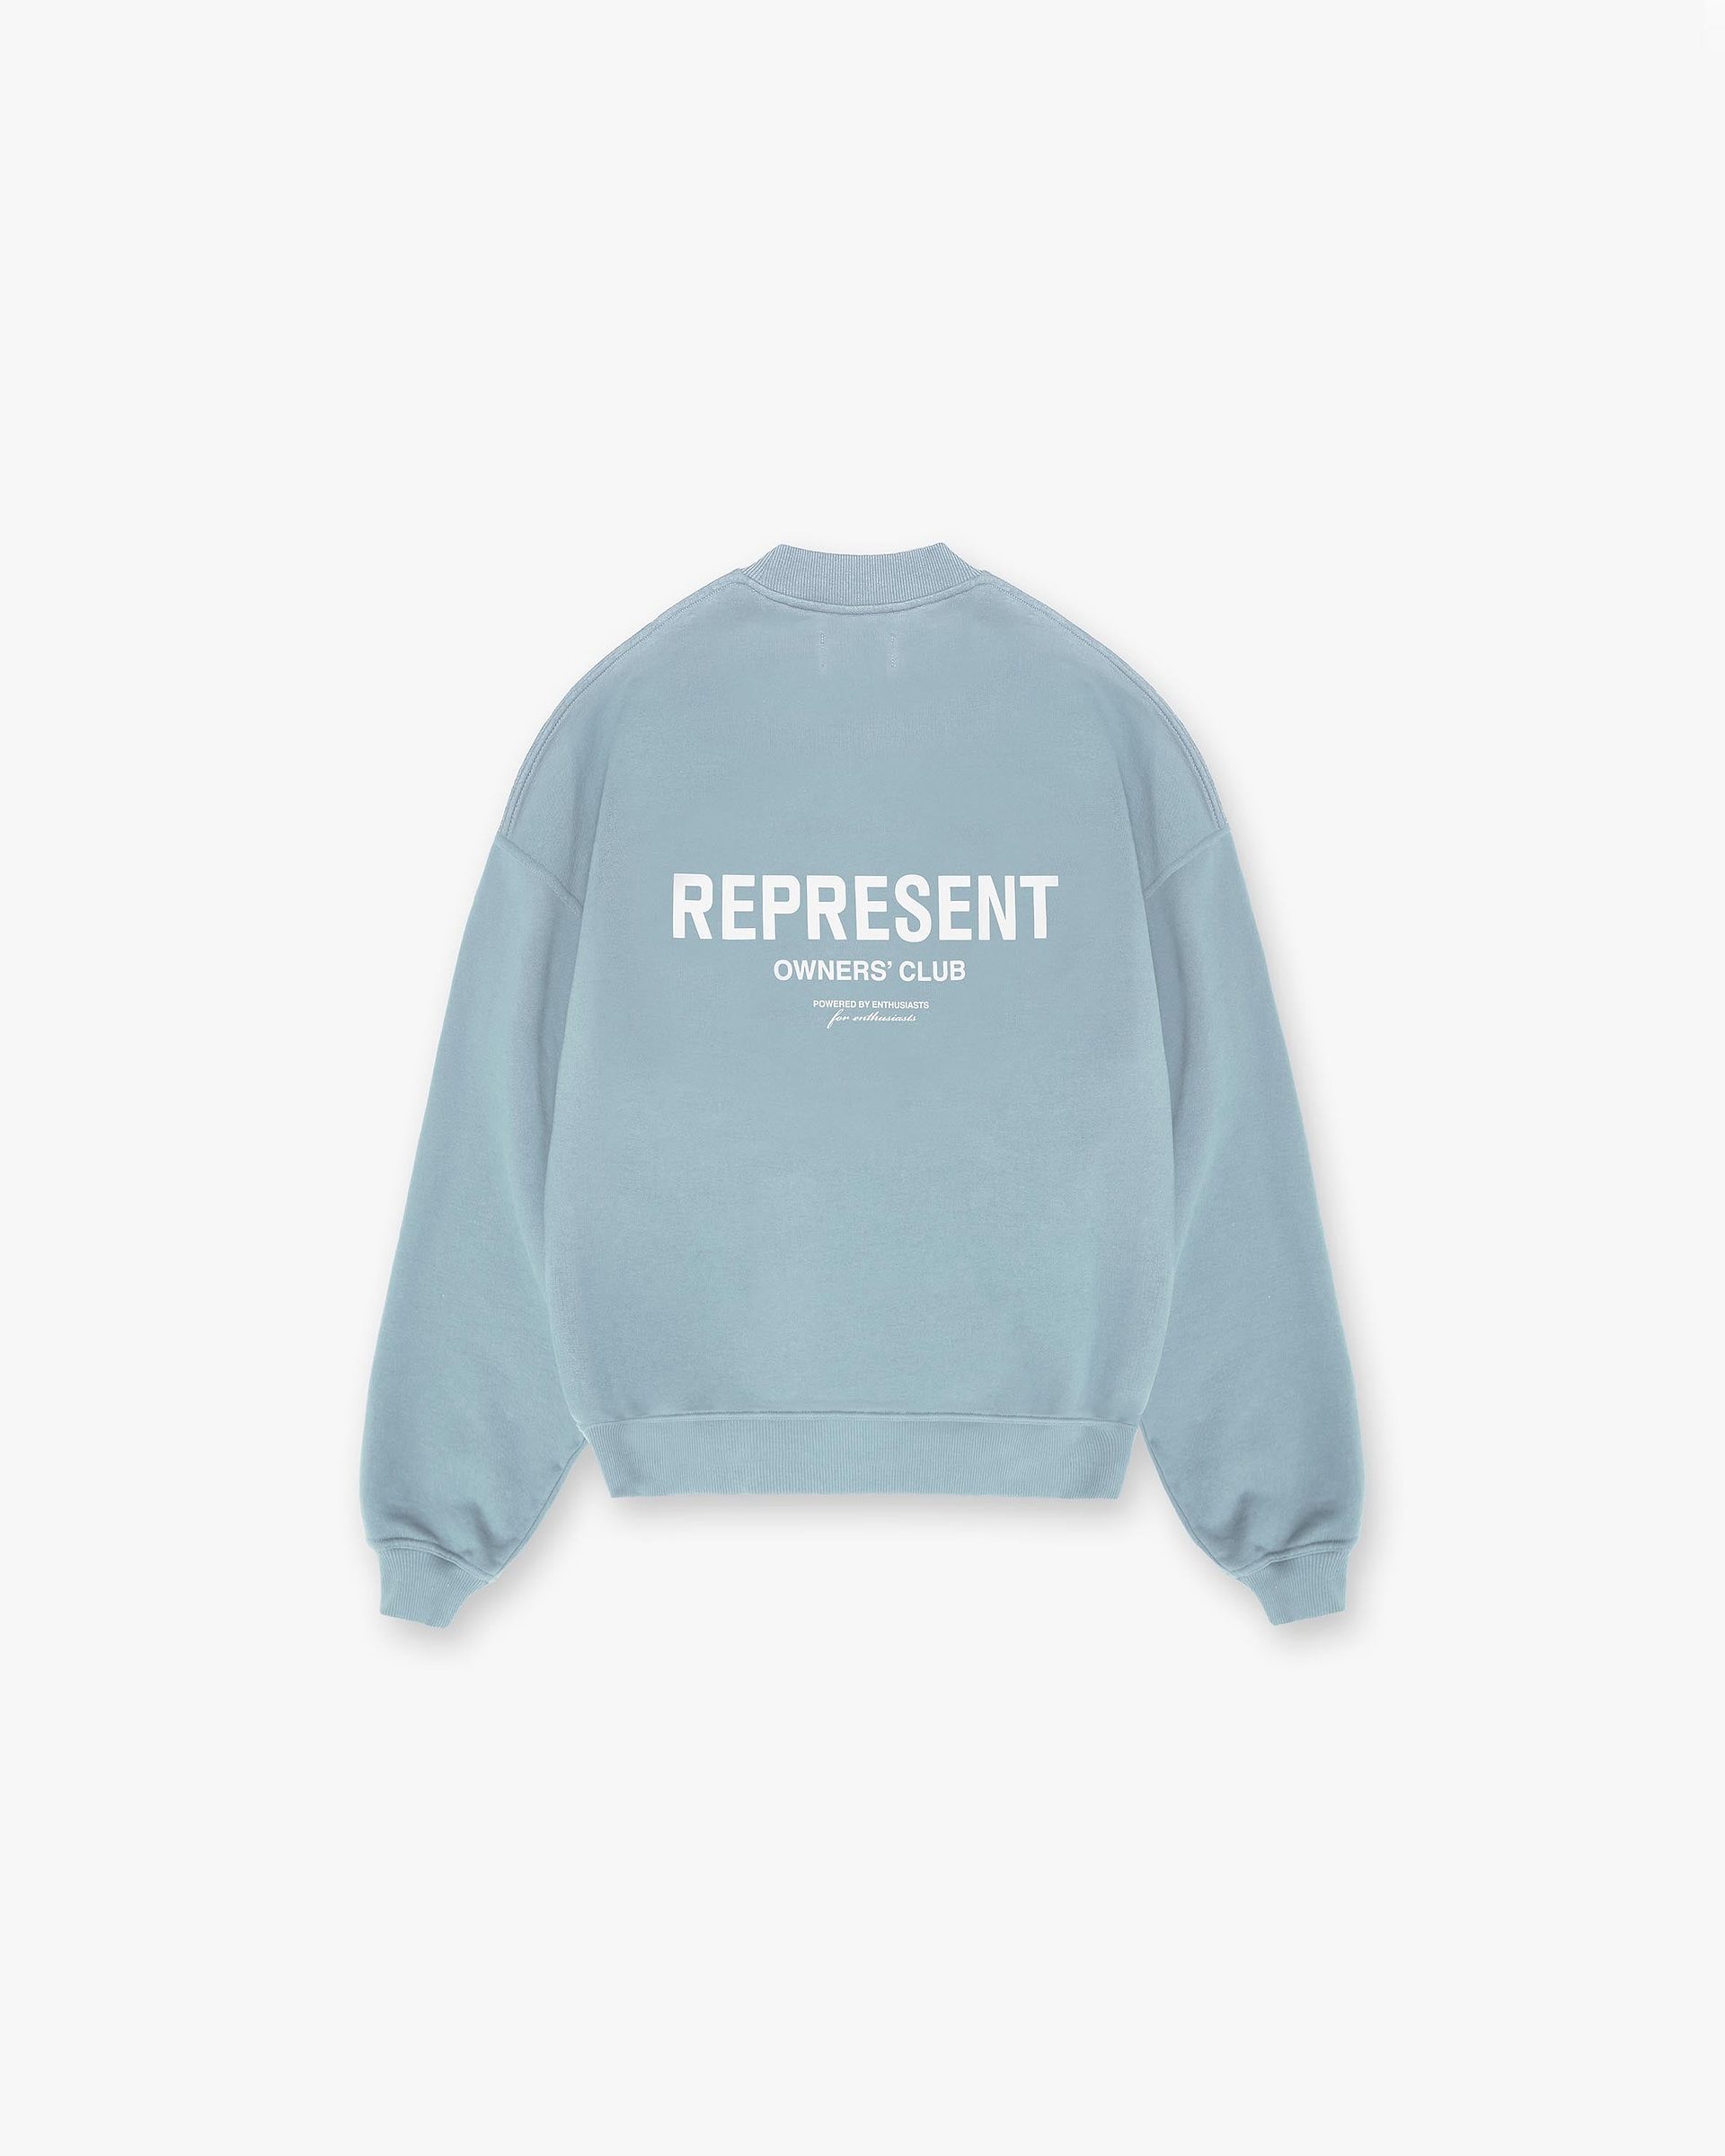 Represent Owners Club Sweater | Powder Blue Sweaters | Represent ...